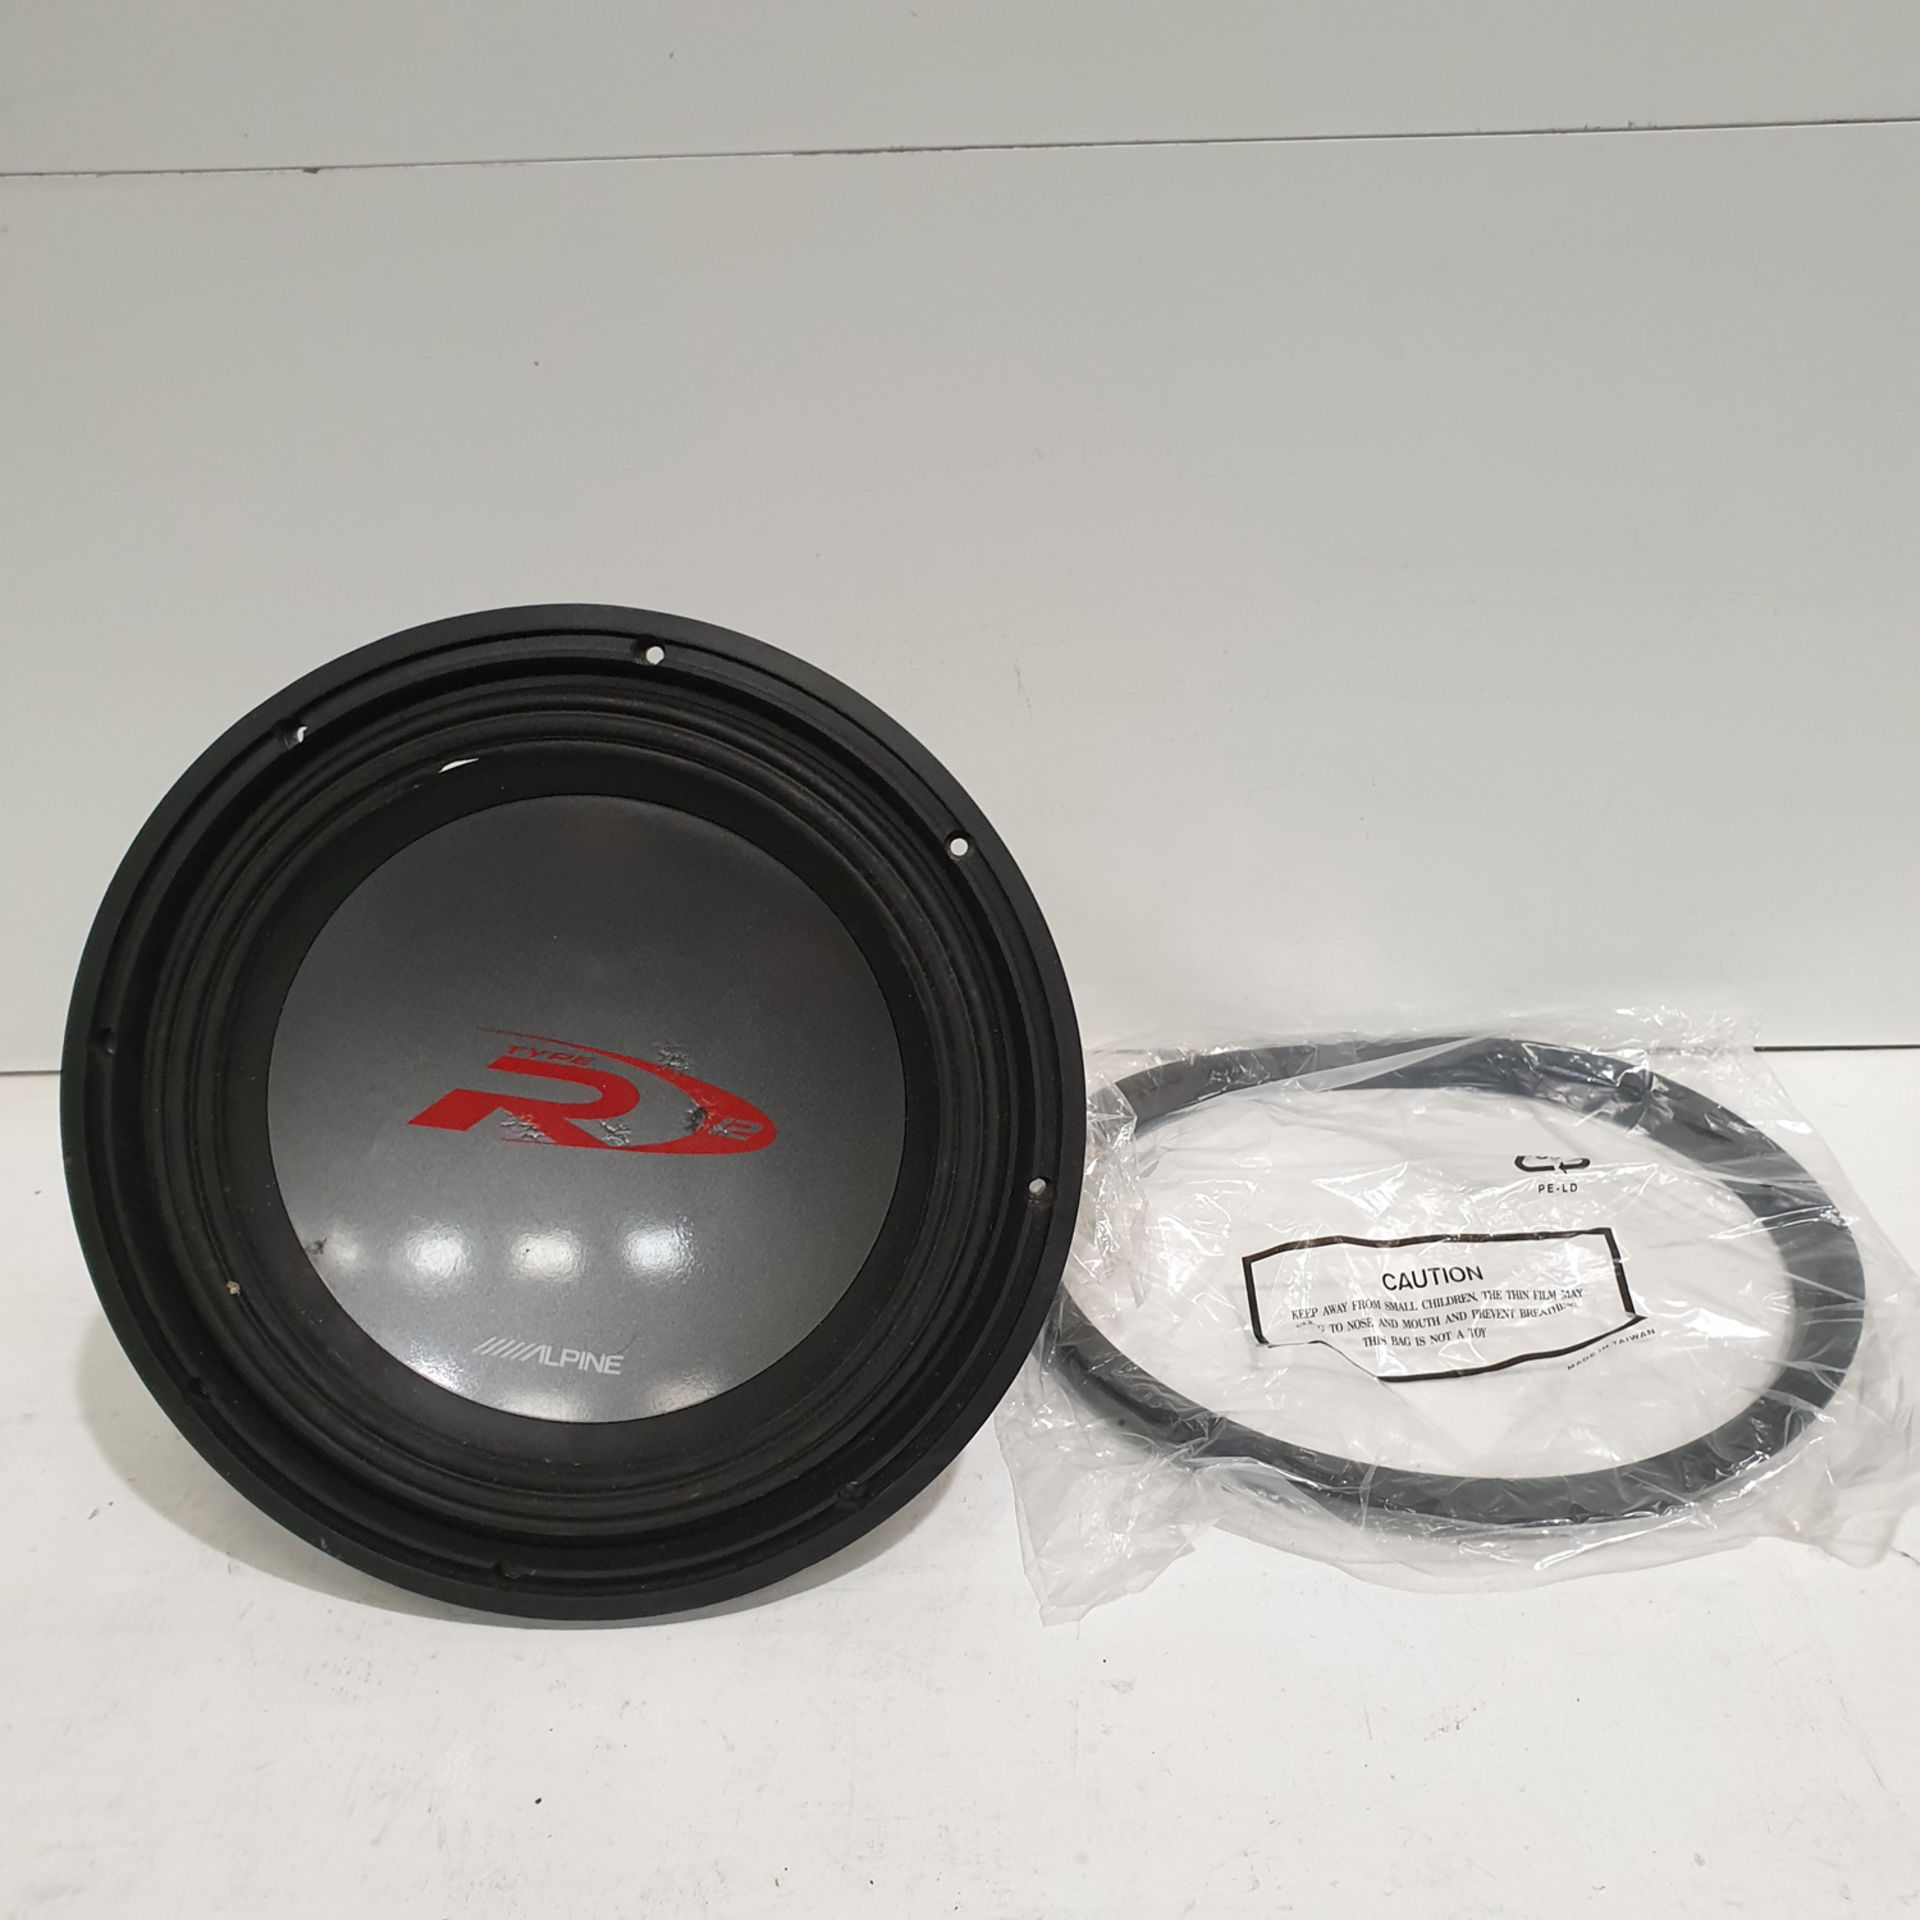 Alpine Type R 12" High Performance Dual Voice Coil Subwoofer. Model SWR 12420.